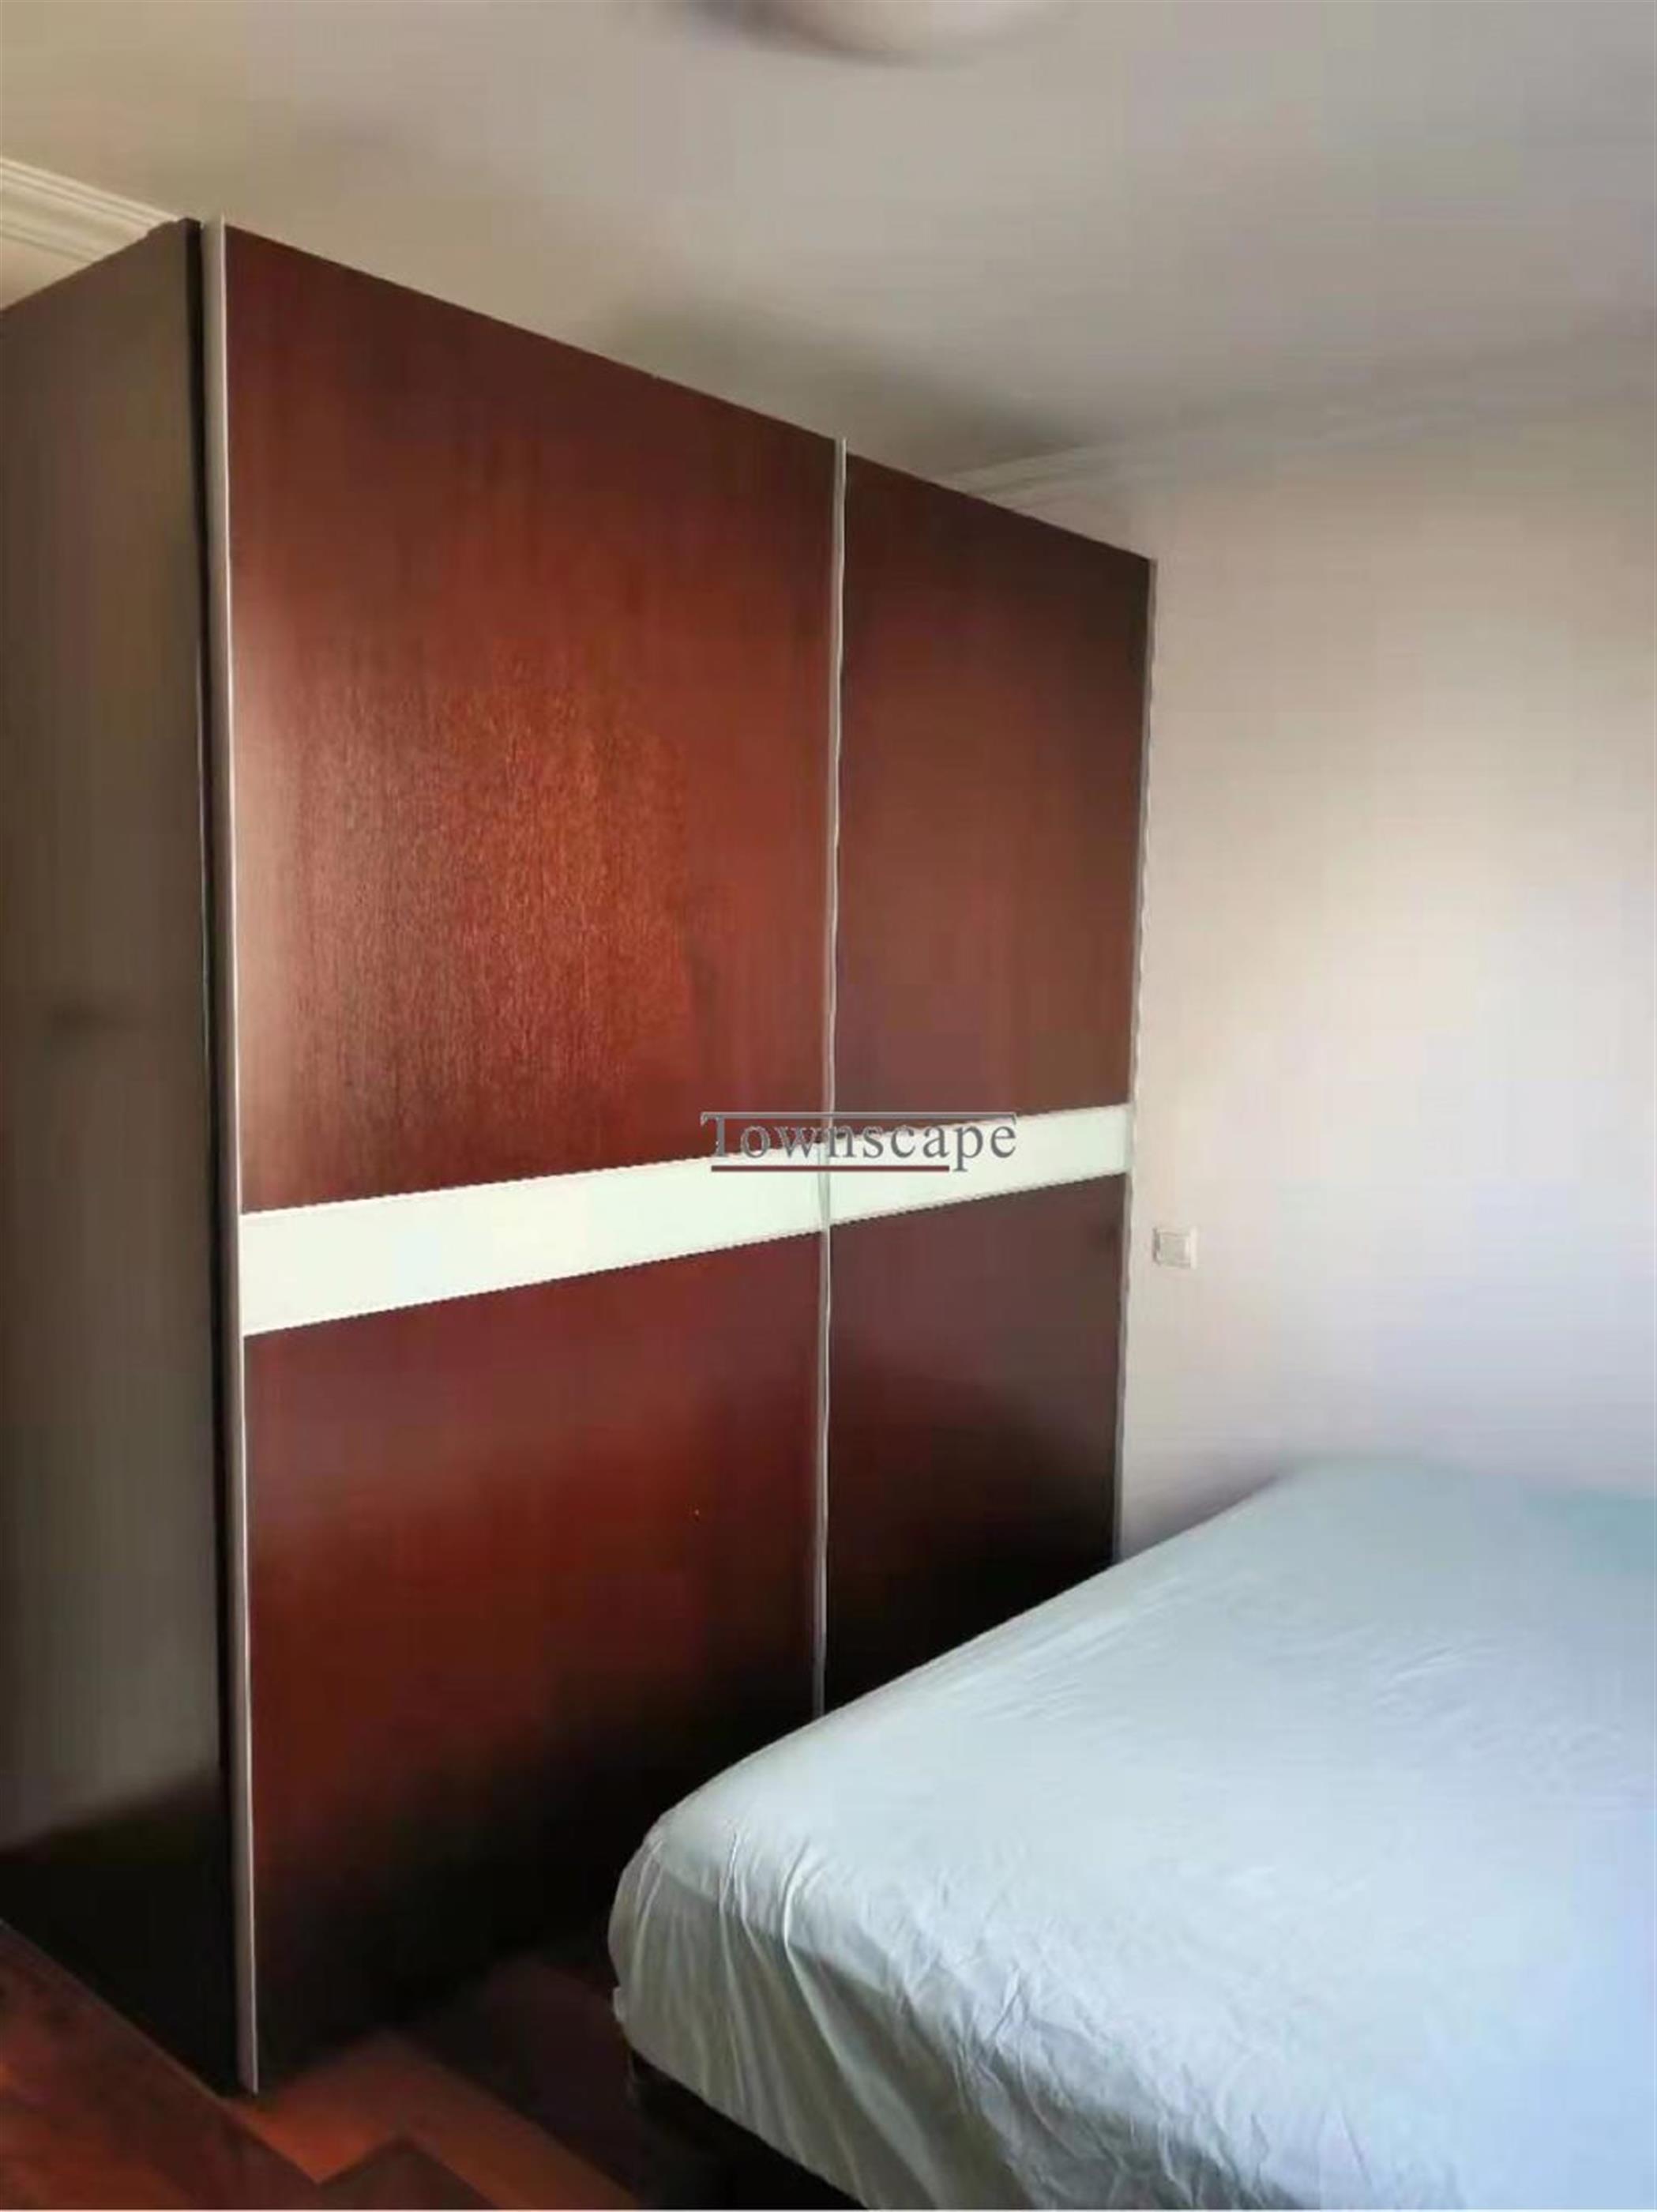 Storage Space Great Value Spacious Bright 3BR Apartment Near LN 10 & Zoo for Rent in Shanghai